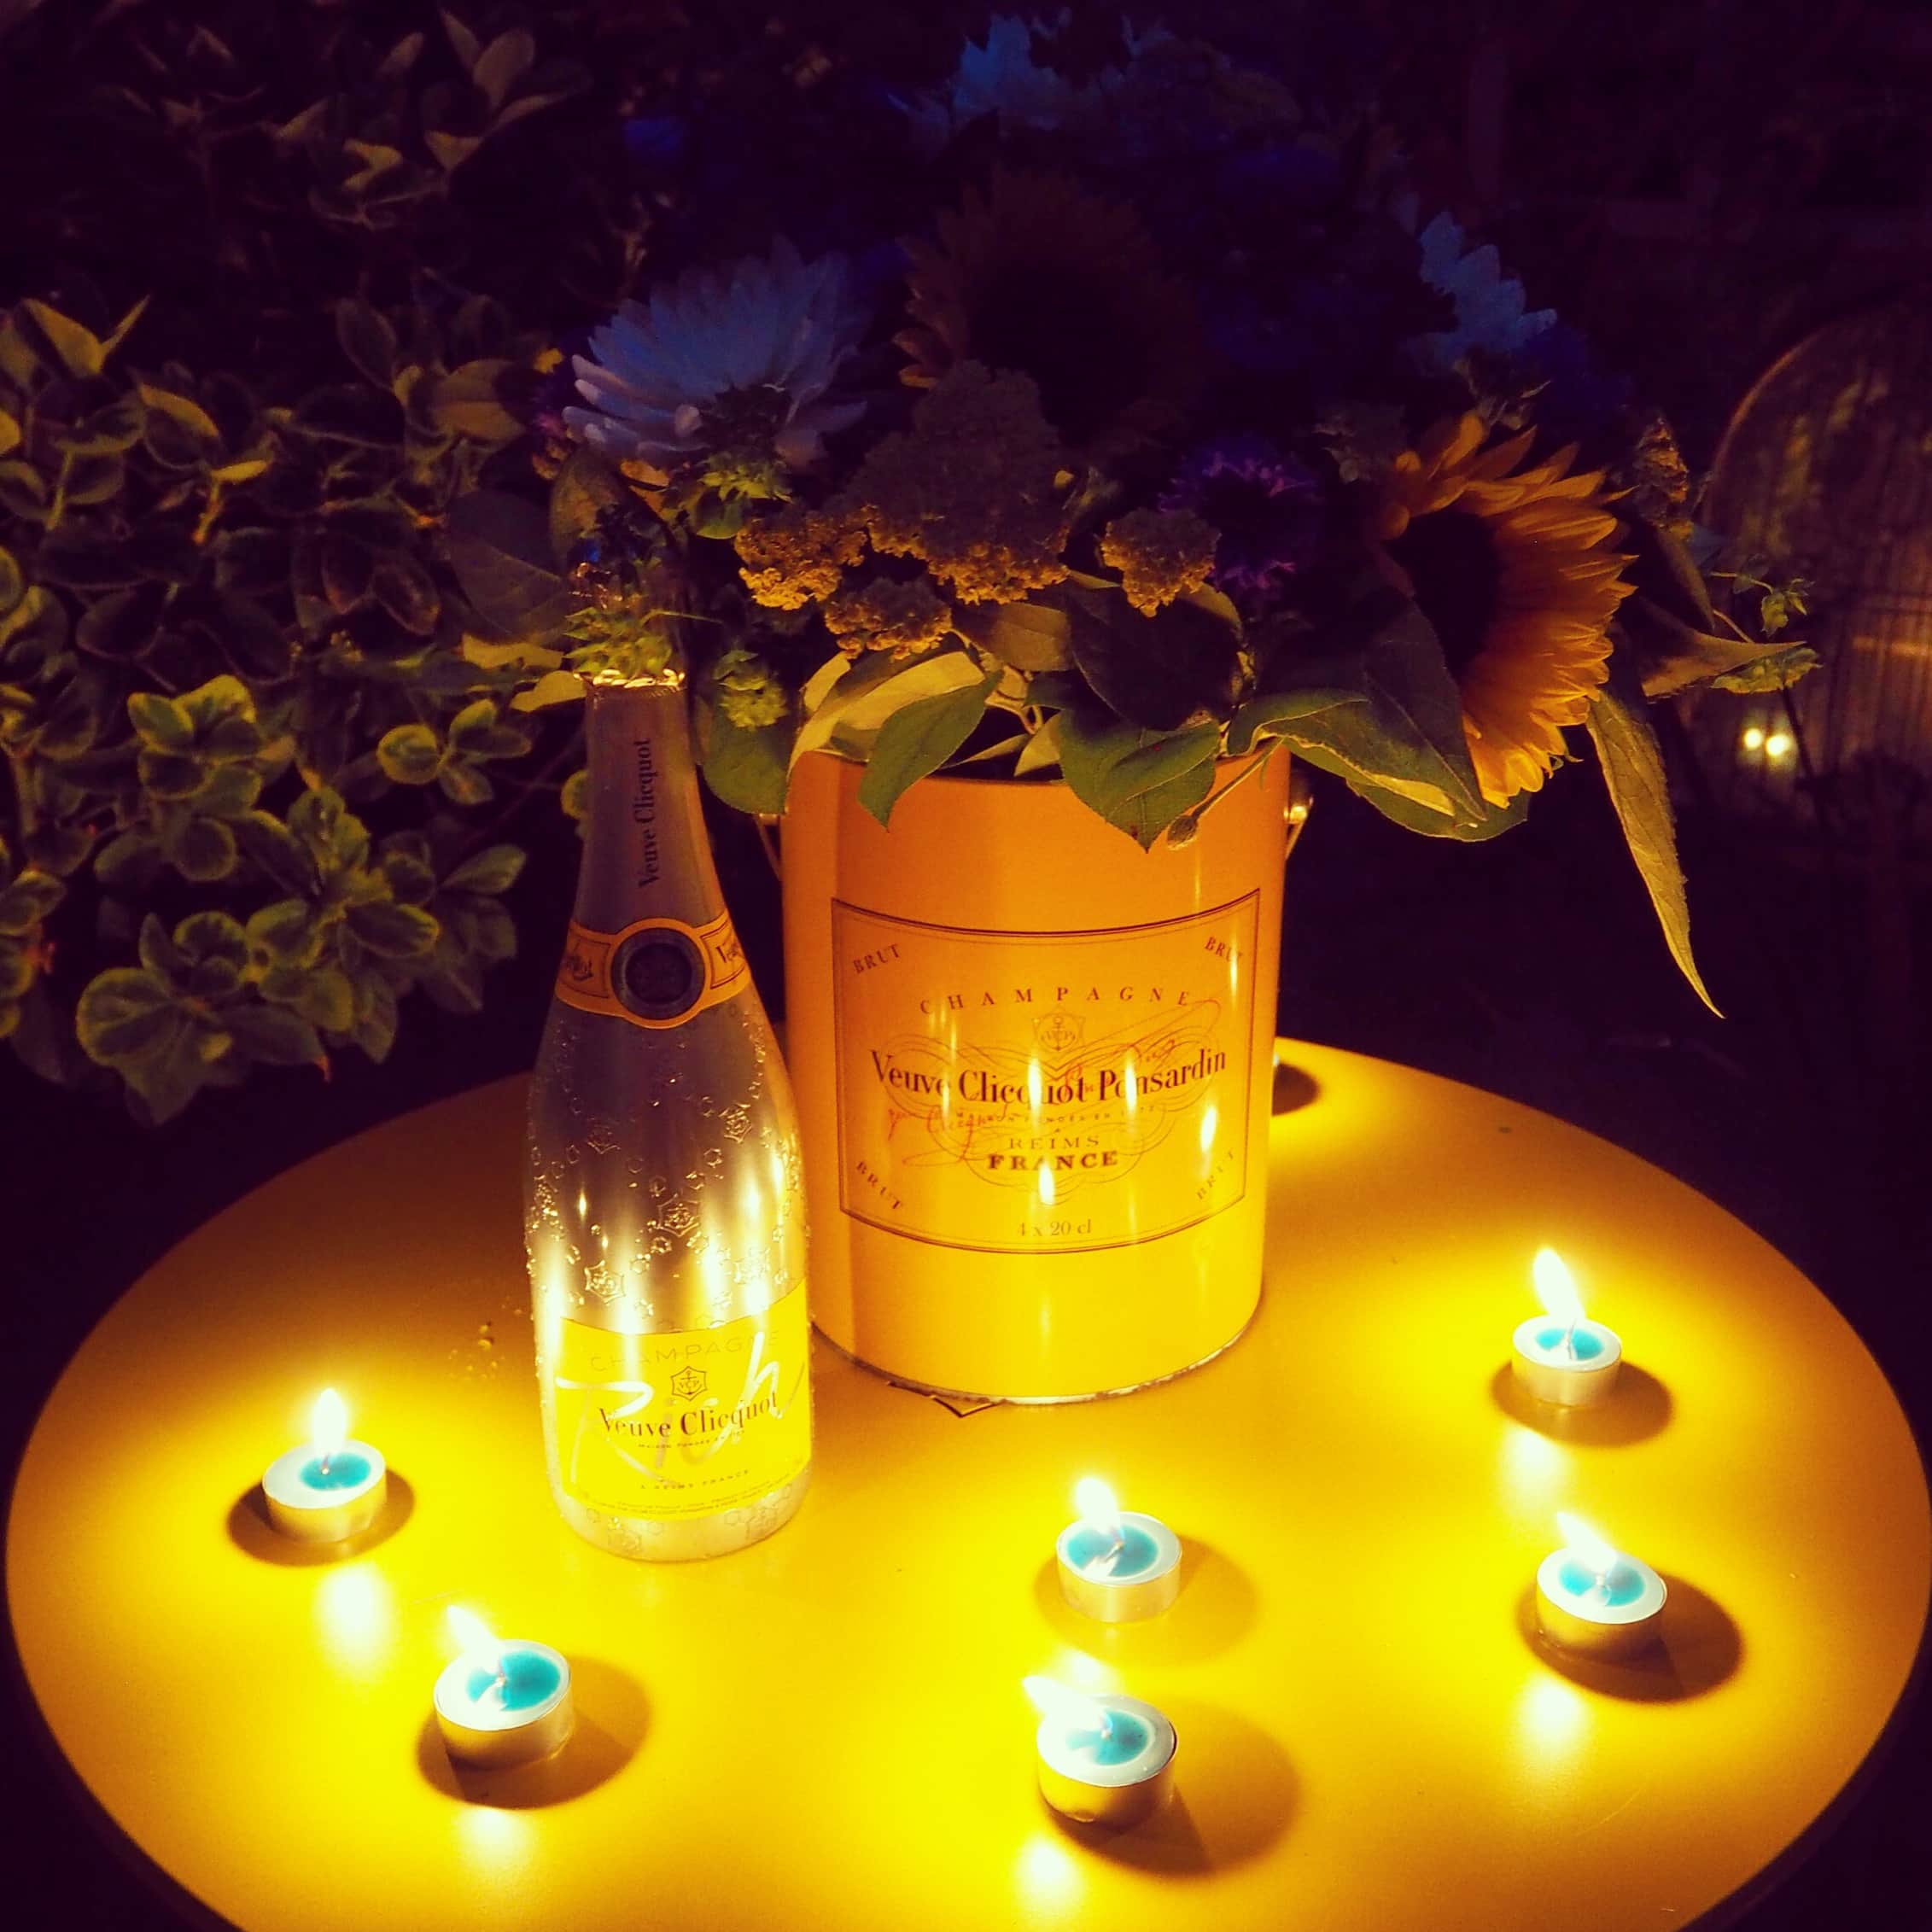 End of Summer Soiree with Veuve Clicquot